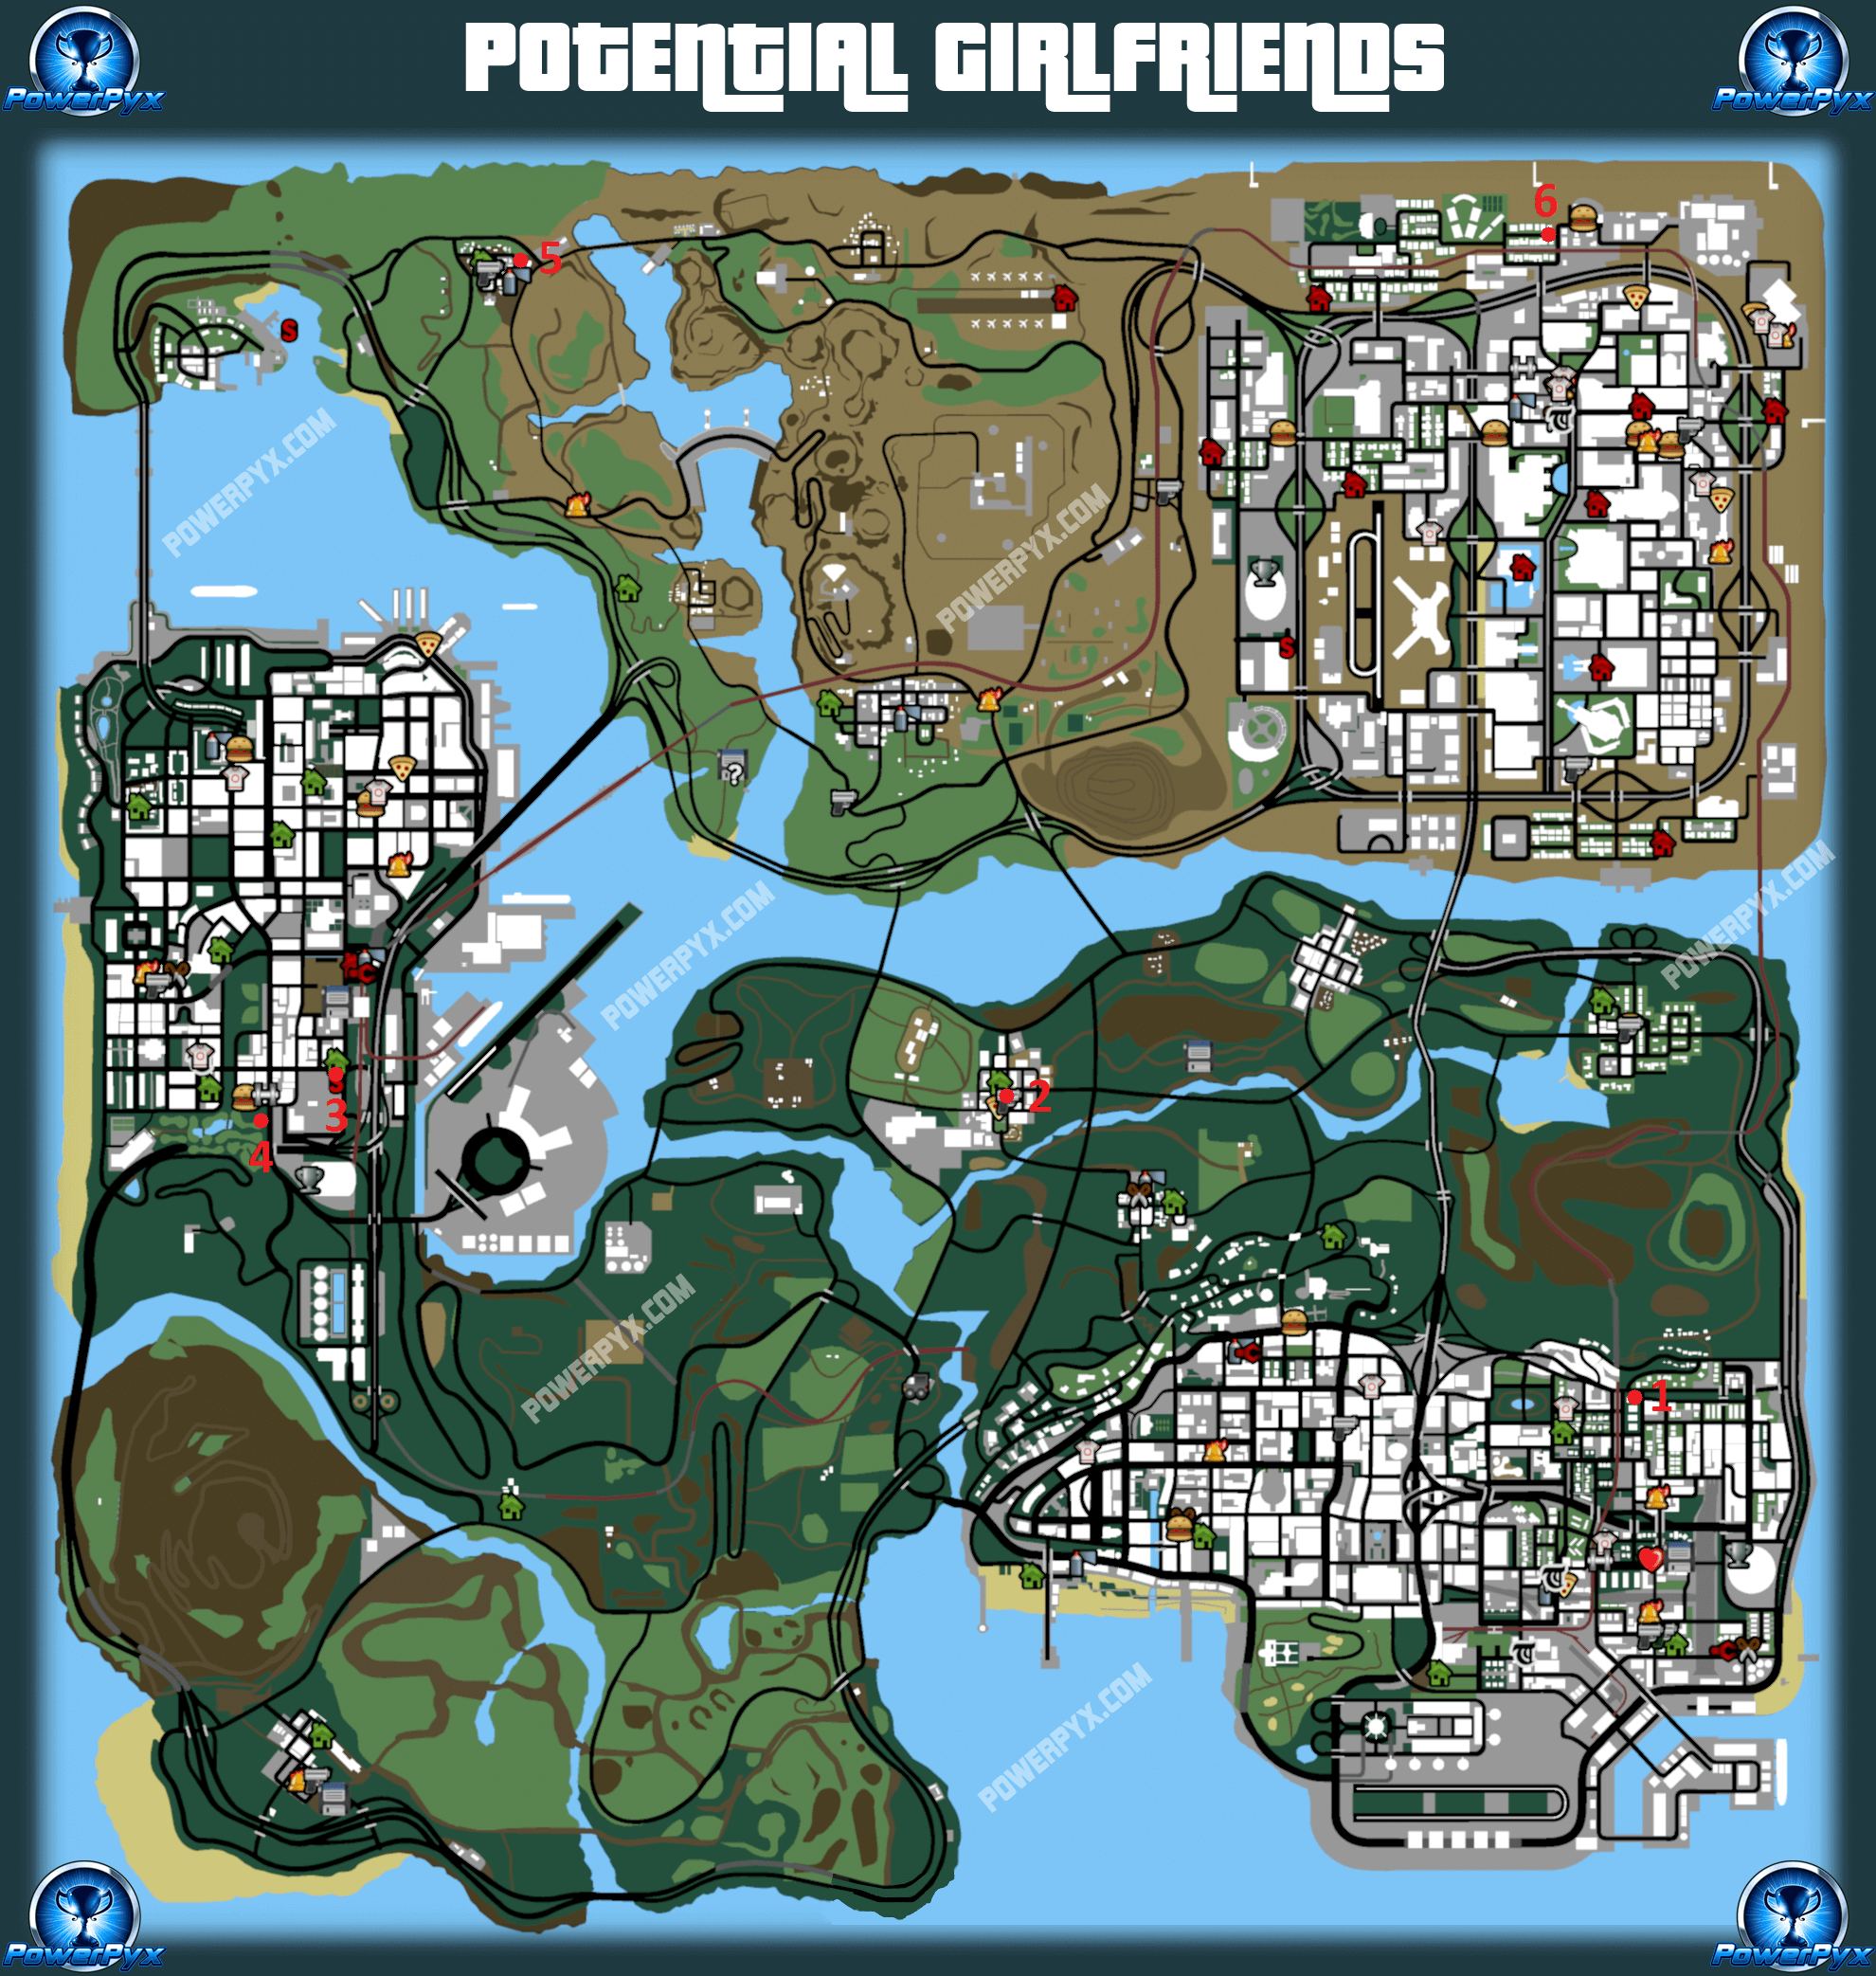 GTA San Andreas Definitive All Girlfriends Locations picture